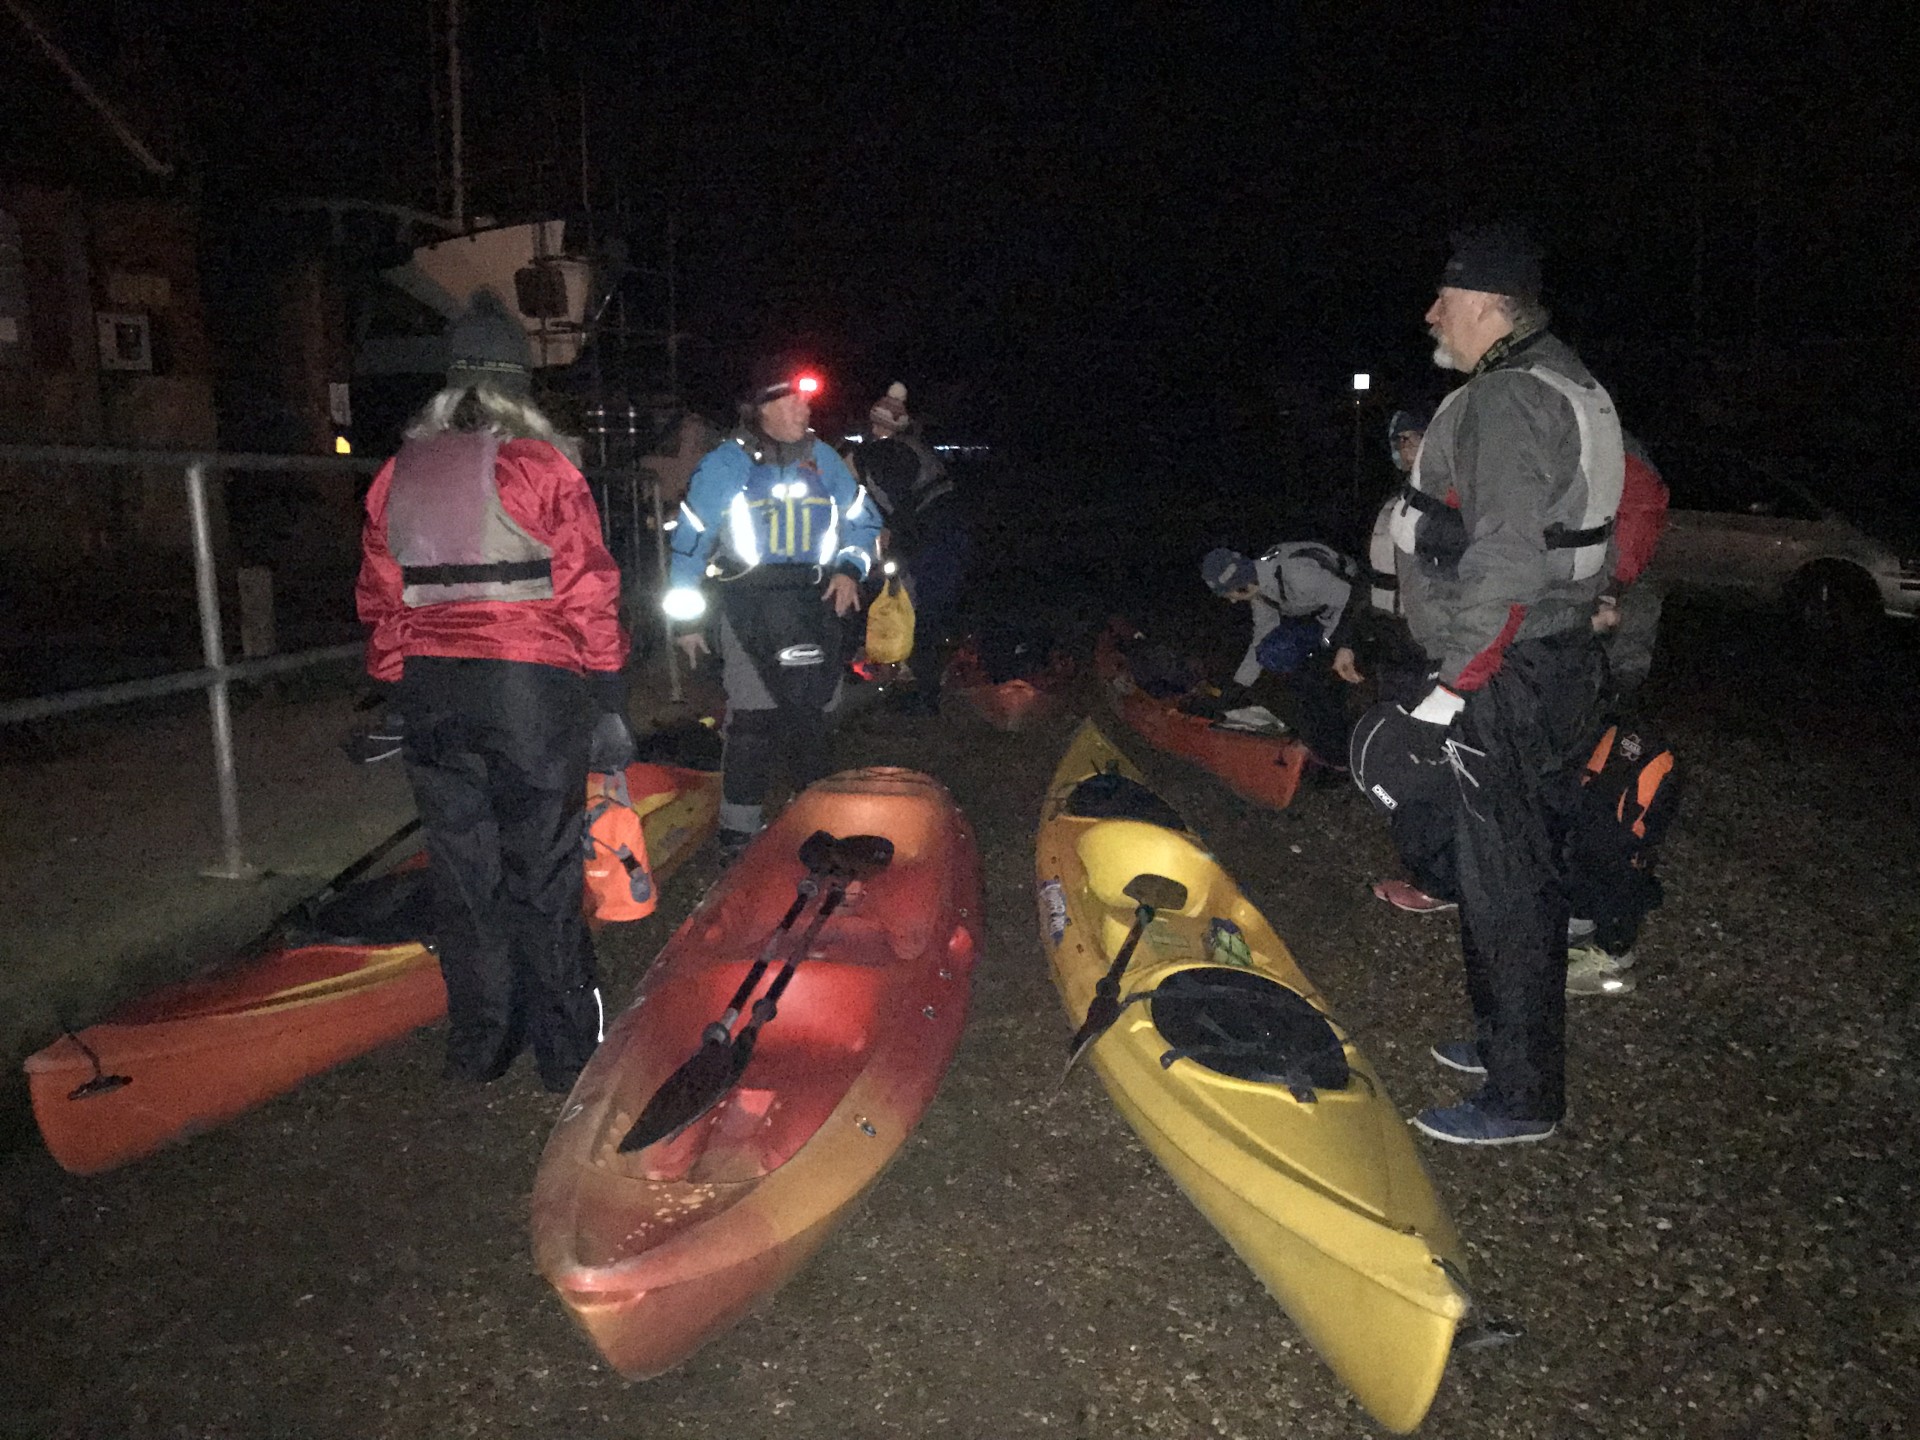 Guests & guide preparing to launch kayaks for the New Years eve fireworks kayak trip